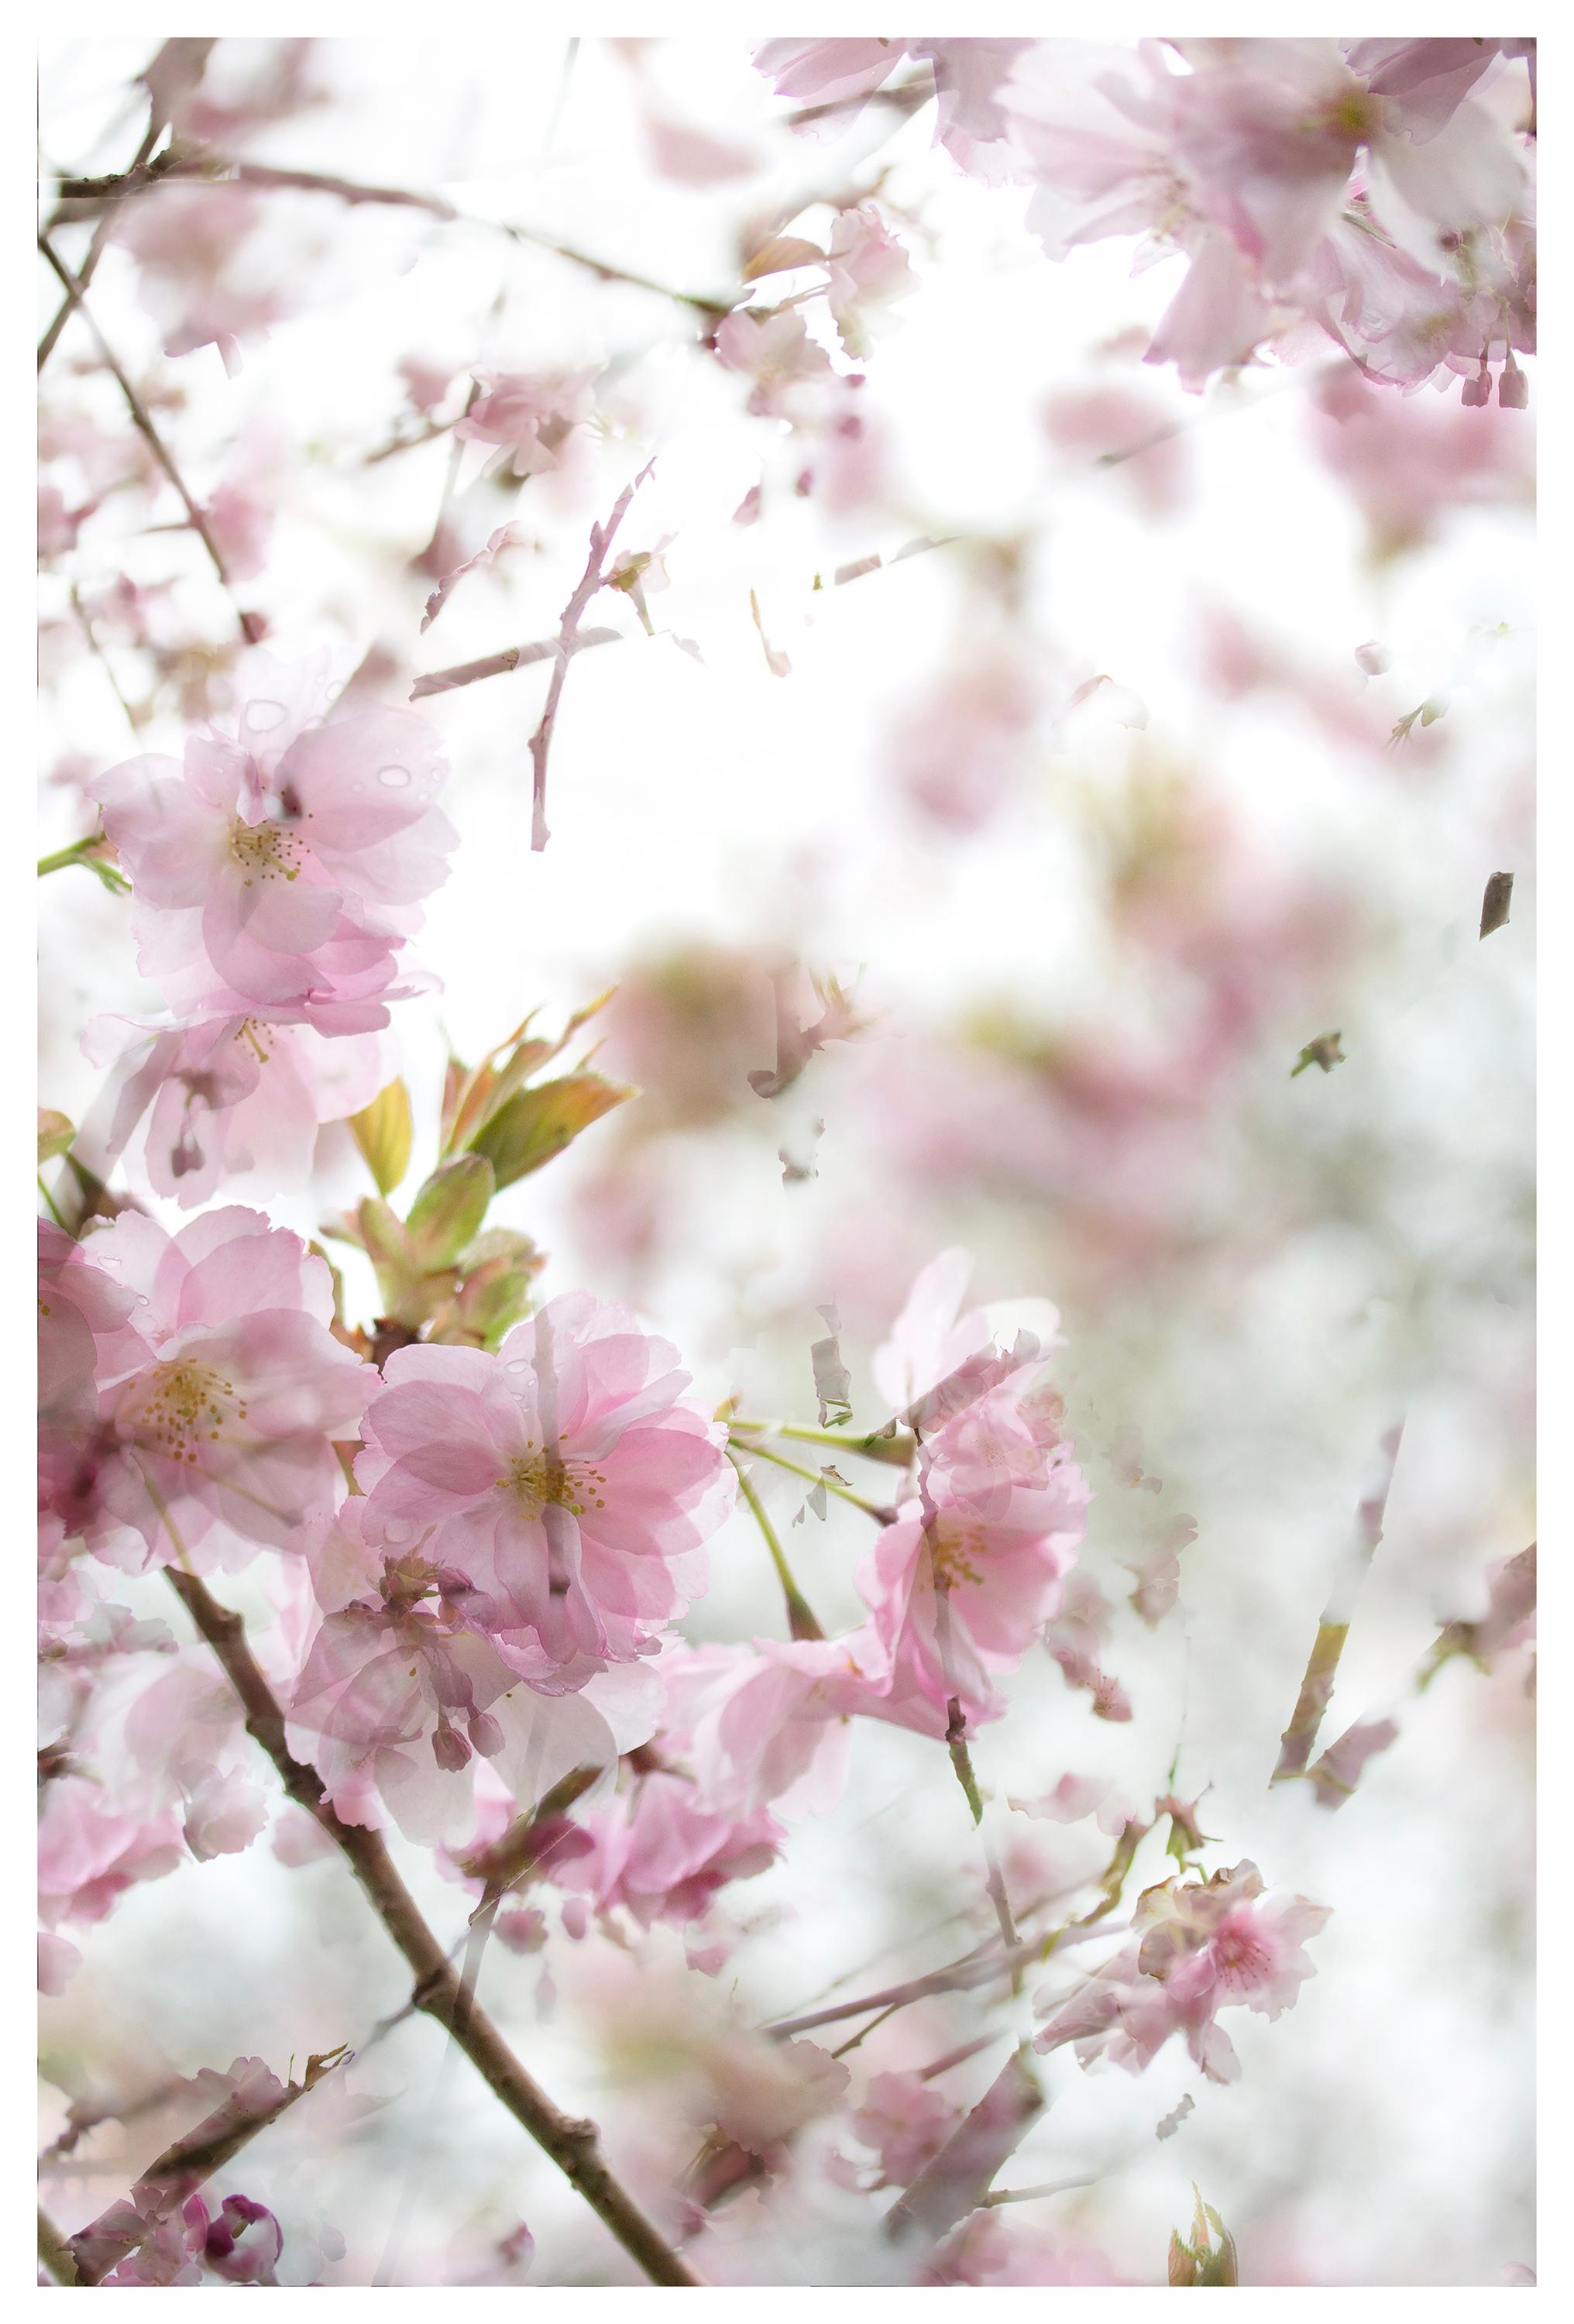 Sophia Milligan Color Photograph - 'The Optimism of Spring' Large Scale Photo Cherry blossom Sakura flowers pink